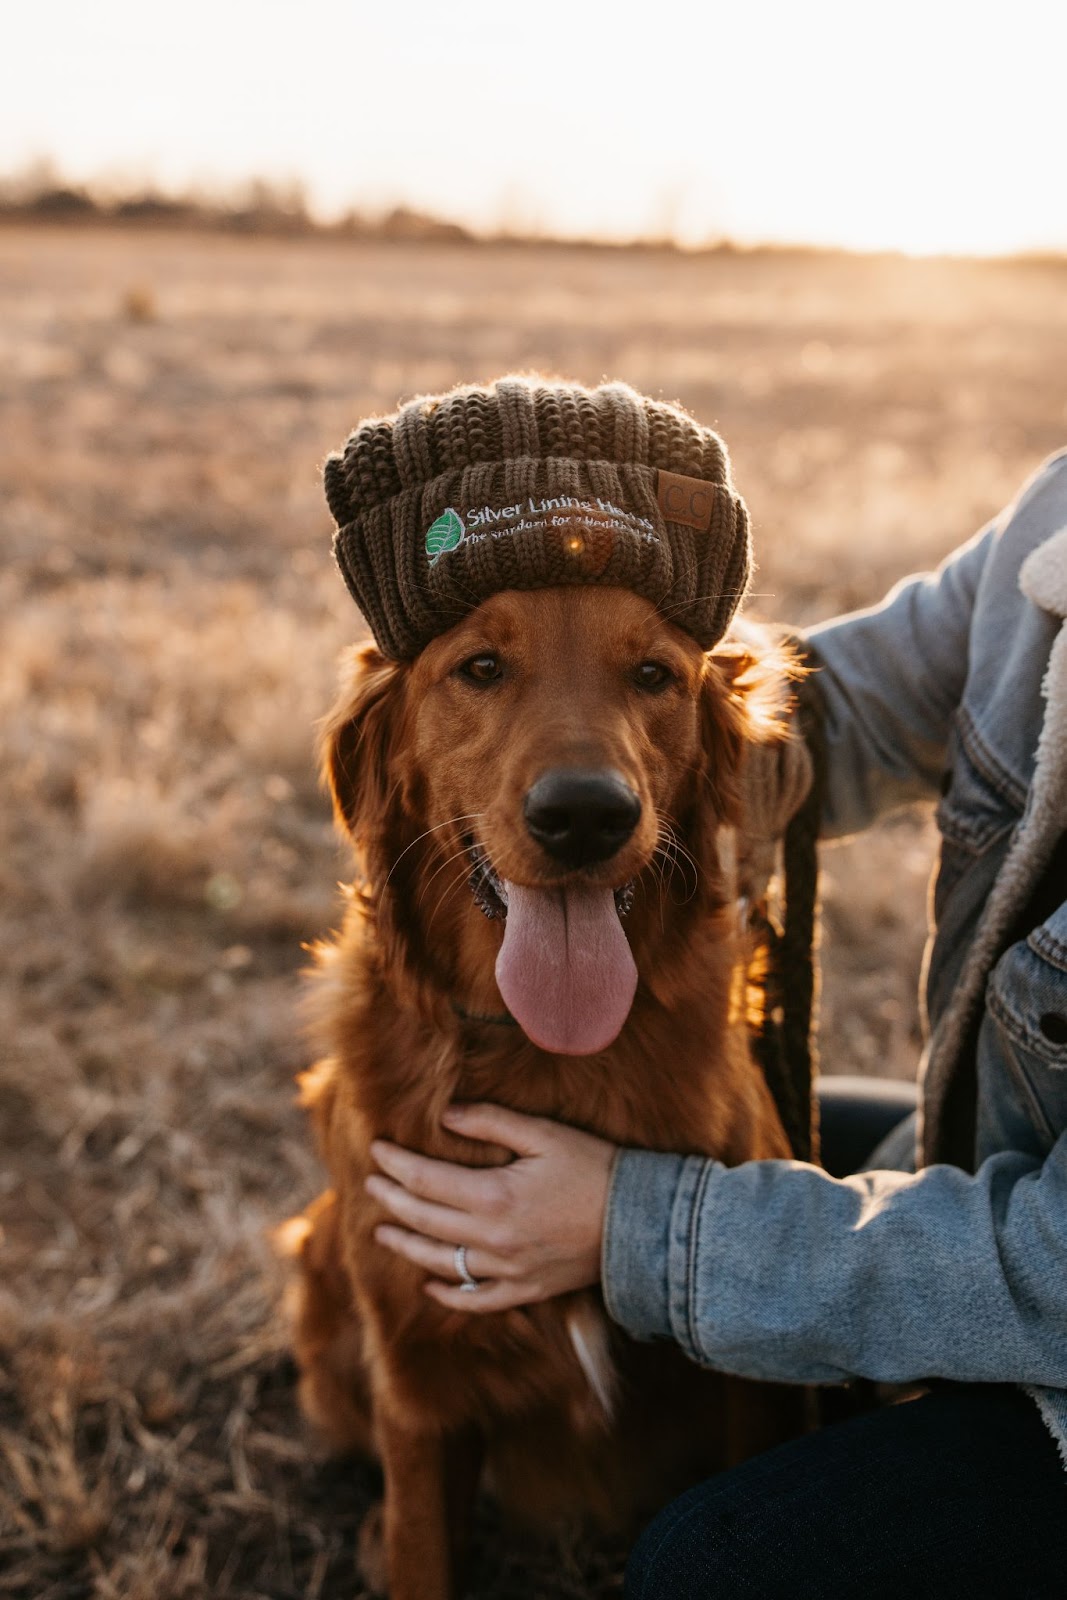 Dog wearing Silver Lining Herb's hat with human hugging them.